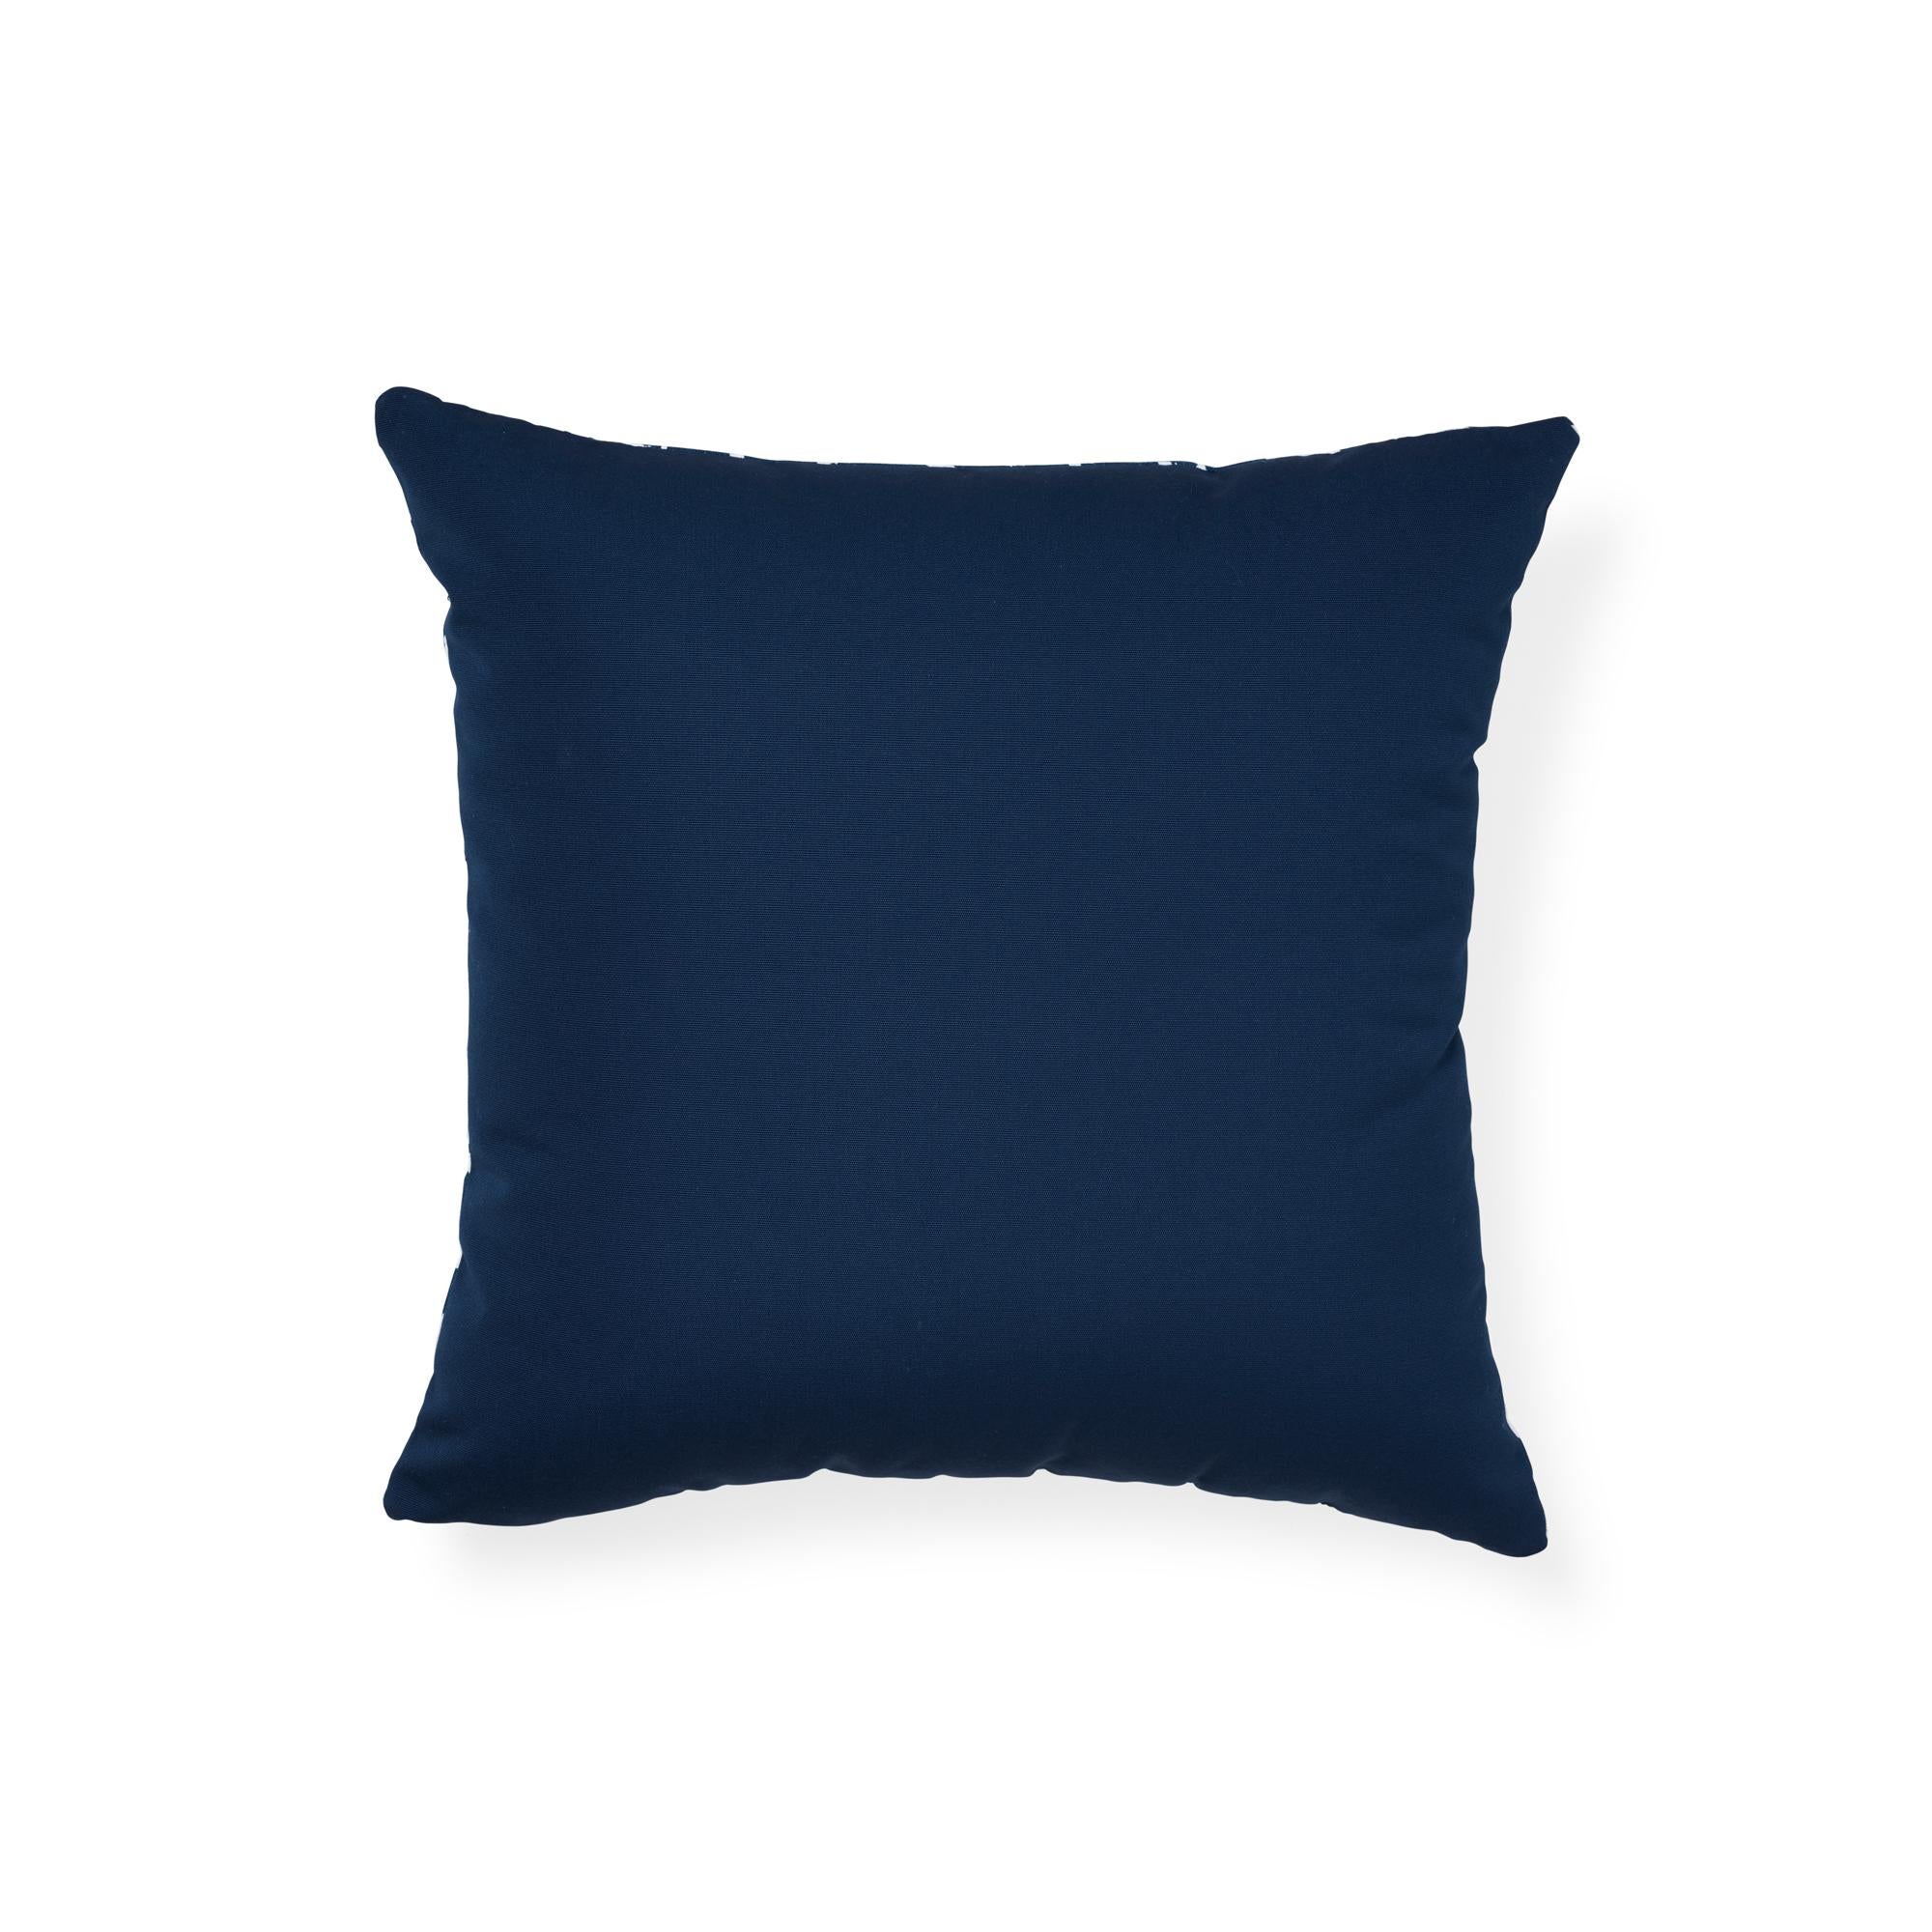 The face of this indoor or outdoor pillow features iconic leopard in navy paired with Ravello in indigo on the back. A sexy animal print first introduced in the 1970s, Iconic leopard is a perennial favorite. Indoor/outdoor synthetic pillow insert